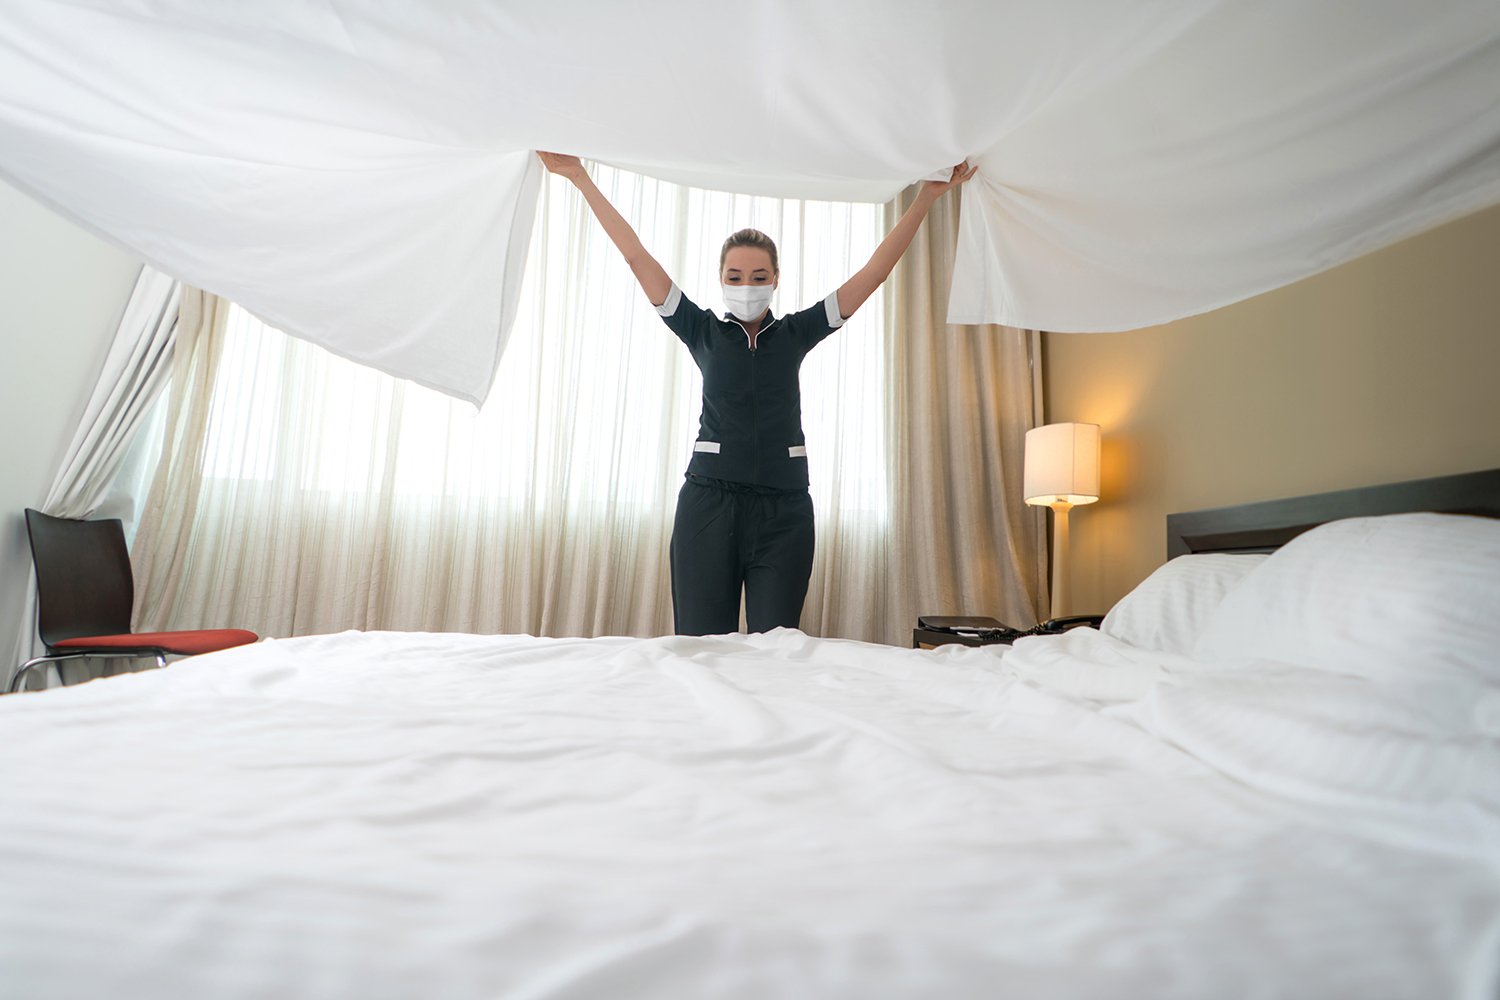 https://www.themanual.com/wp-content/uploads/sites/9/2021/01/how-clean-are-hotel-bed-sheets-2021.jpg?p=1